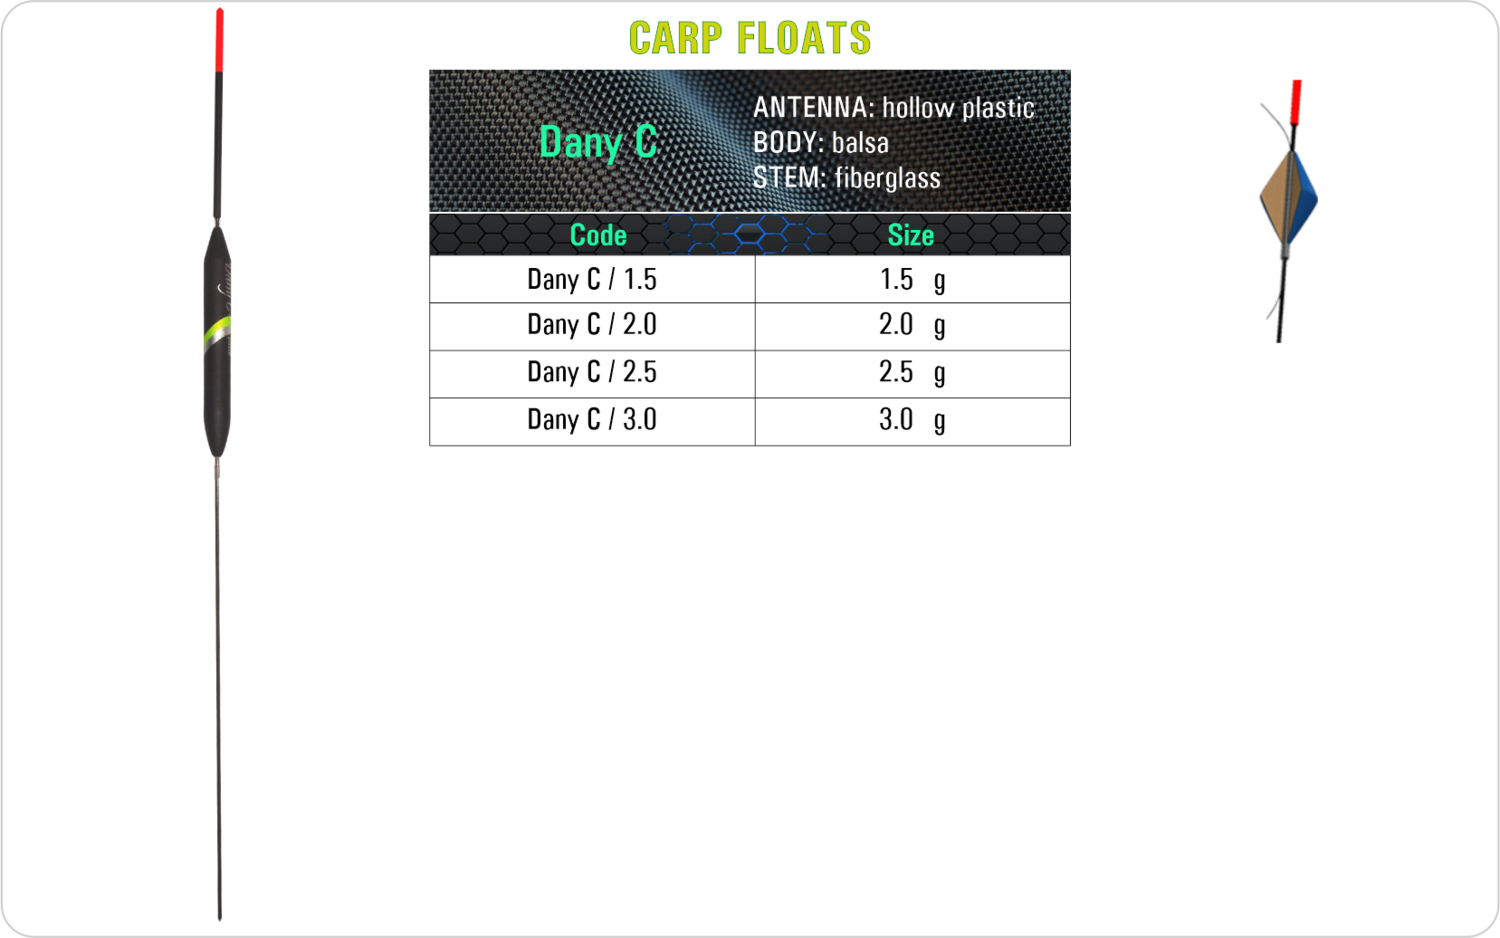 SF Dany C Carp float model and table containing an additional information about this float with different codes, sizes, types of the body, the stem and the antenna of the float.